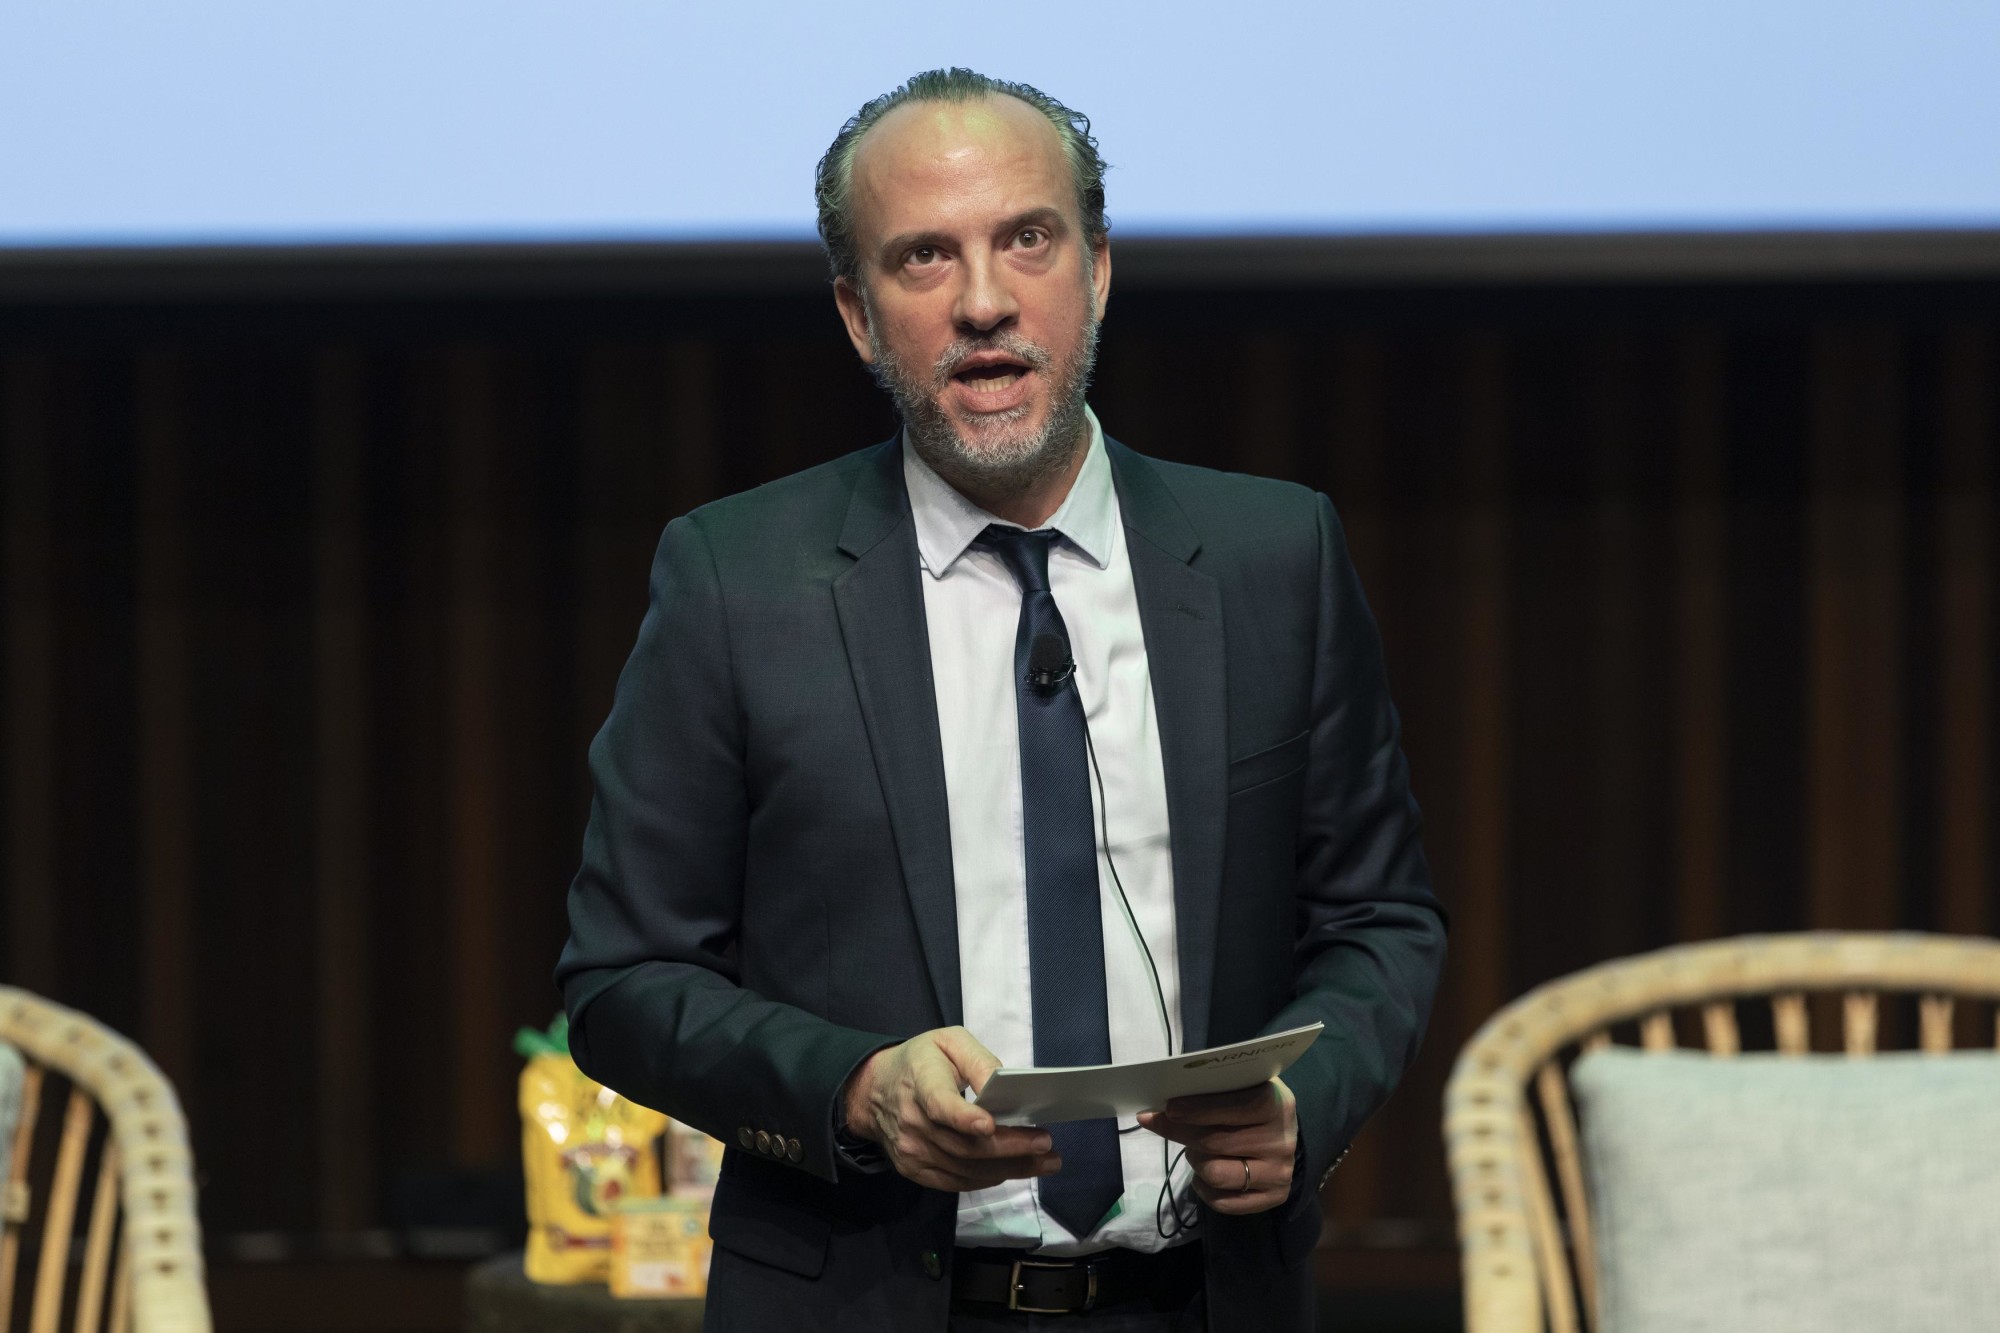 Laurent Duffier, Managing Director L’Orea Middle East speaks during the L’Oreal x Garnier “Can Beauty Go Green” event at the Terra Auditorium m35215